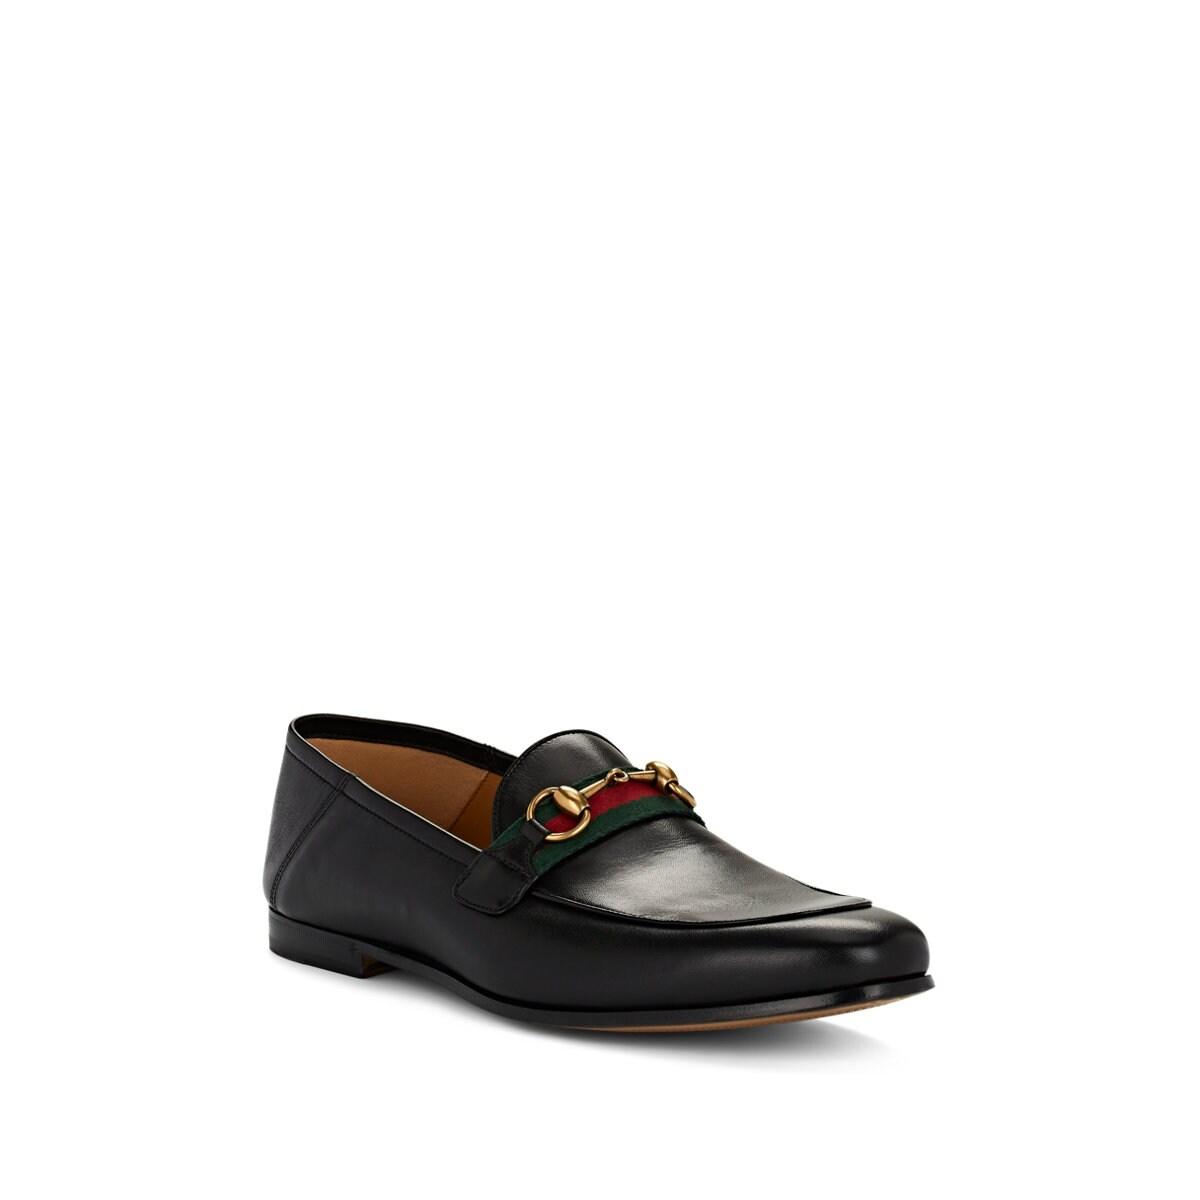 Gucci Brixton Leather Loafers in Black for Men - Lyst